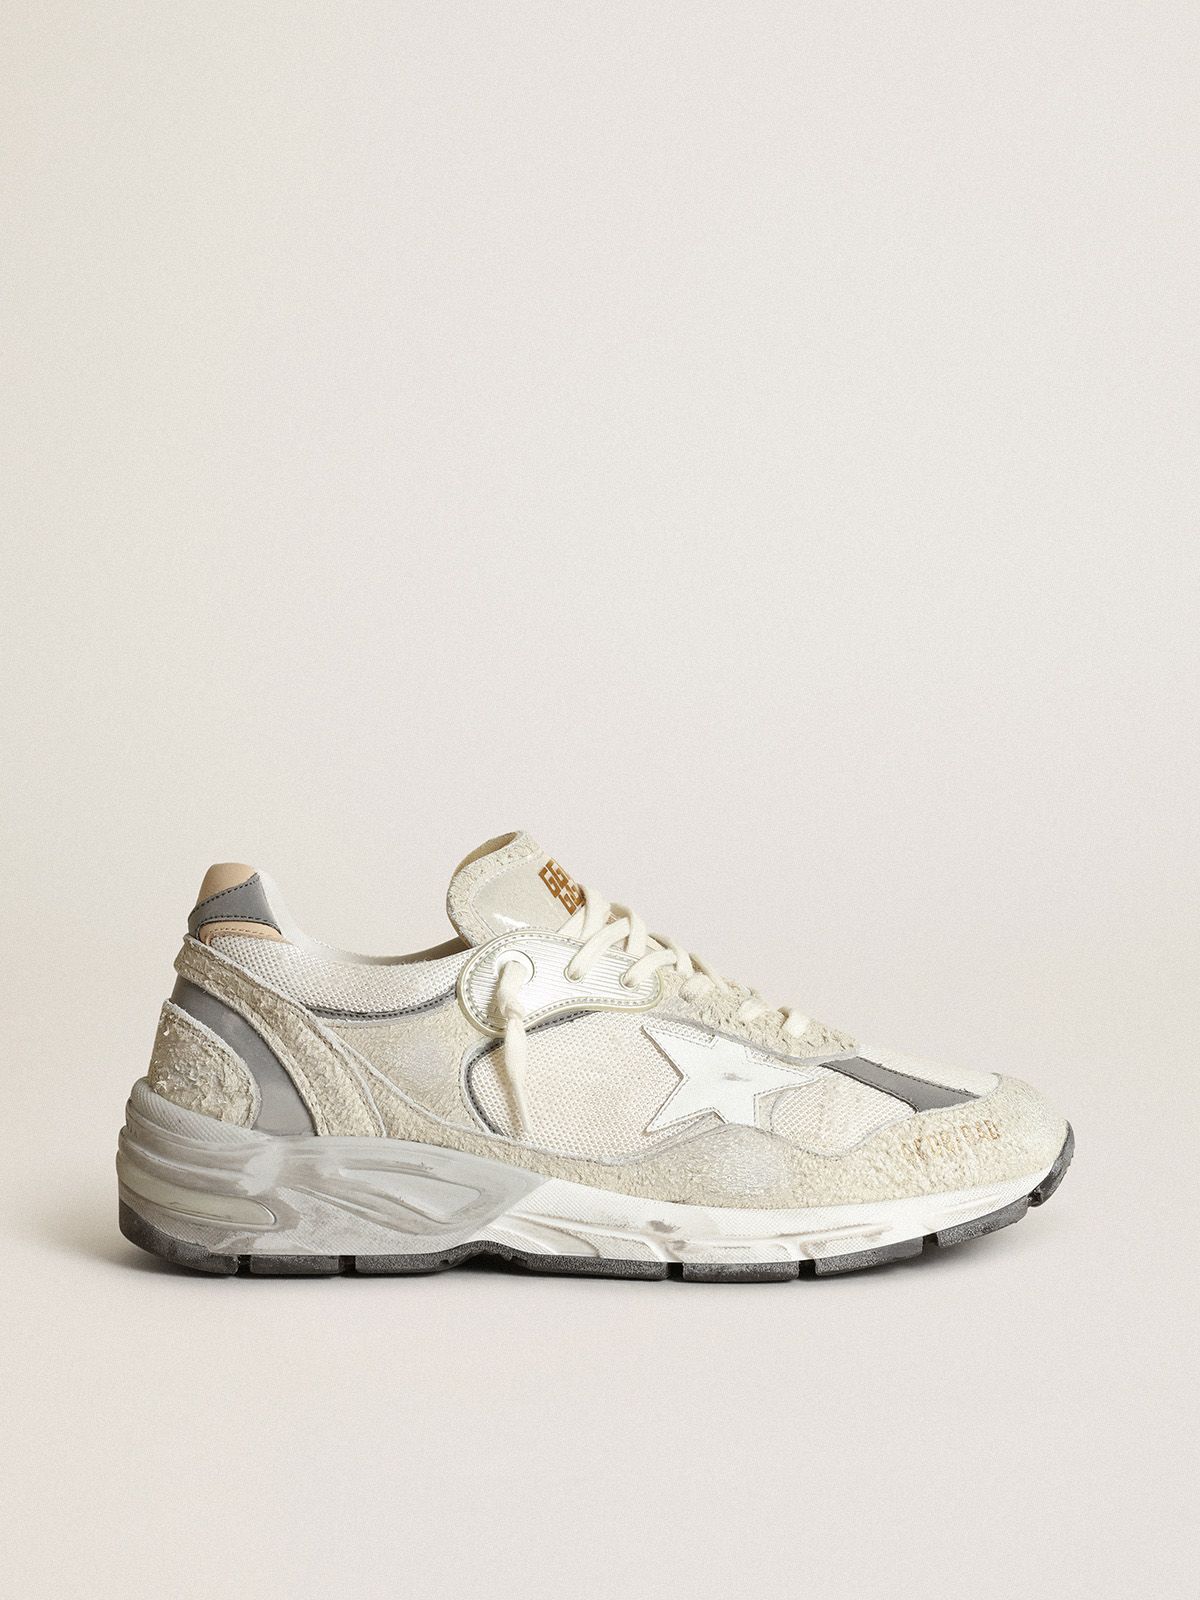 golden goose gray and leather sneakers suede in Dad-Star white star with